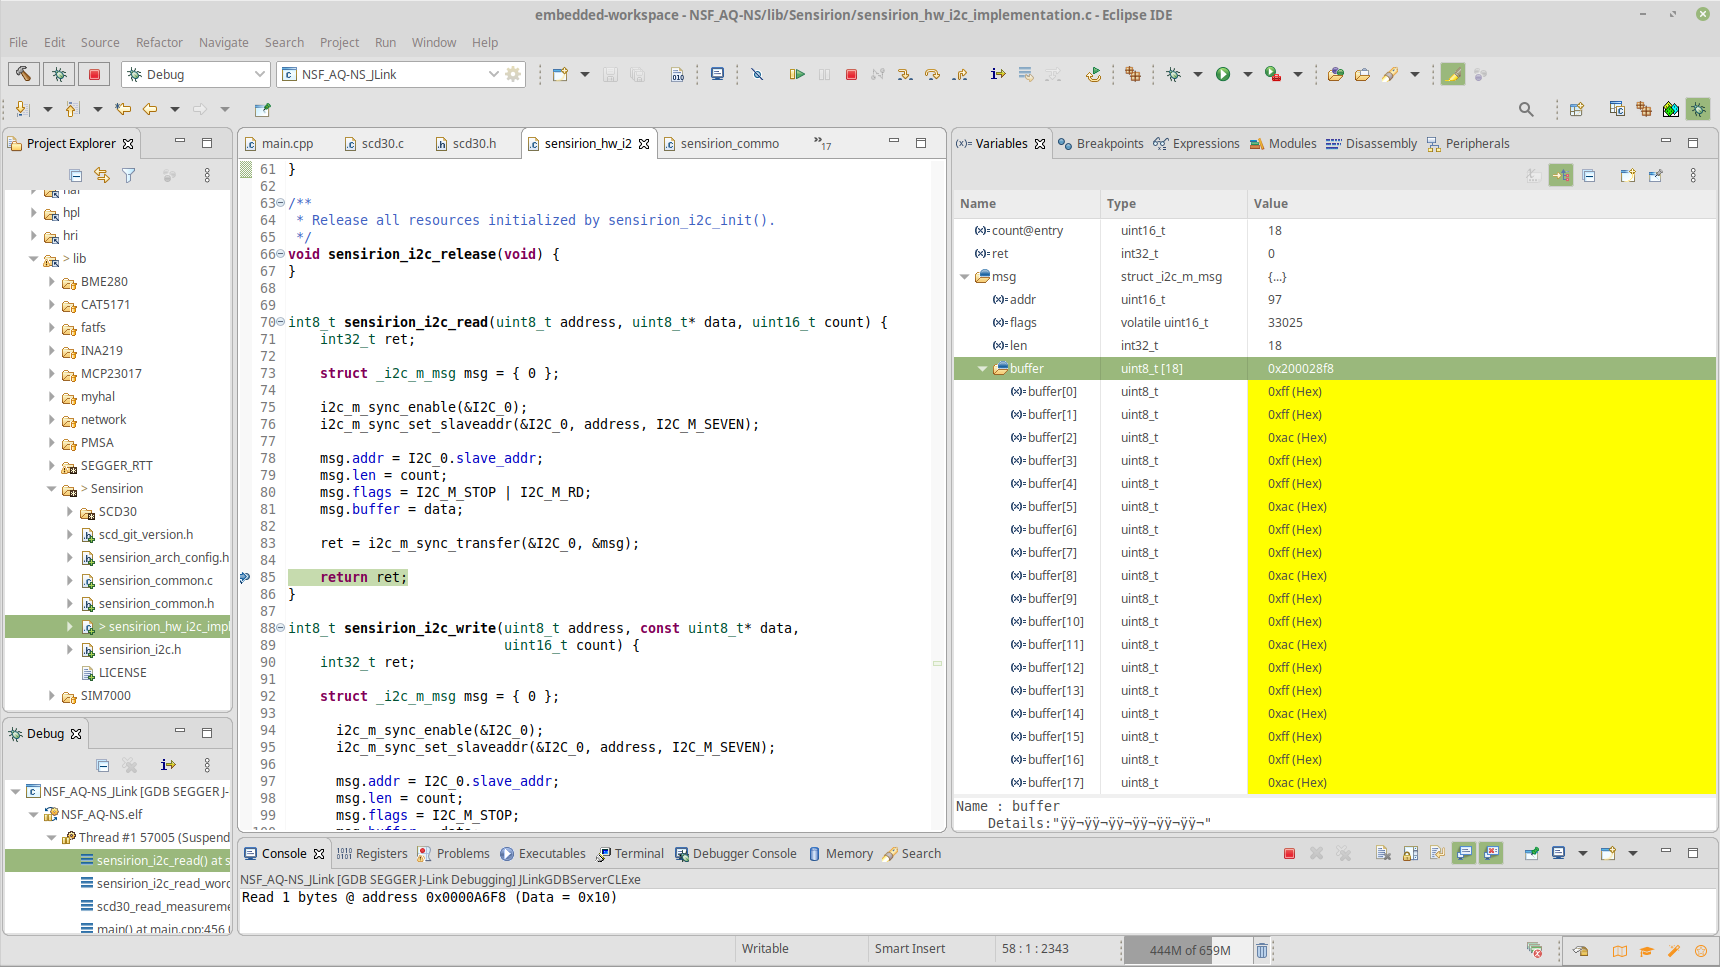 Stepped through Eclipse code showing erroreous data